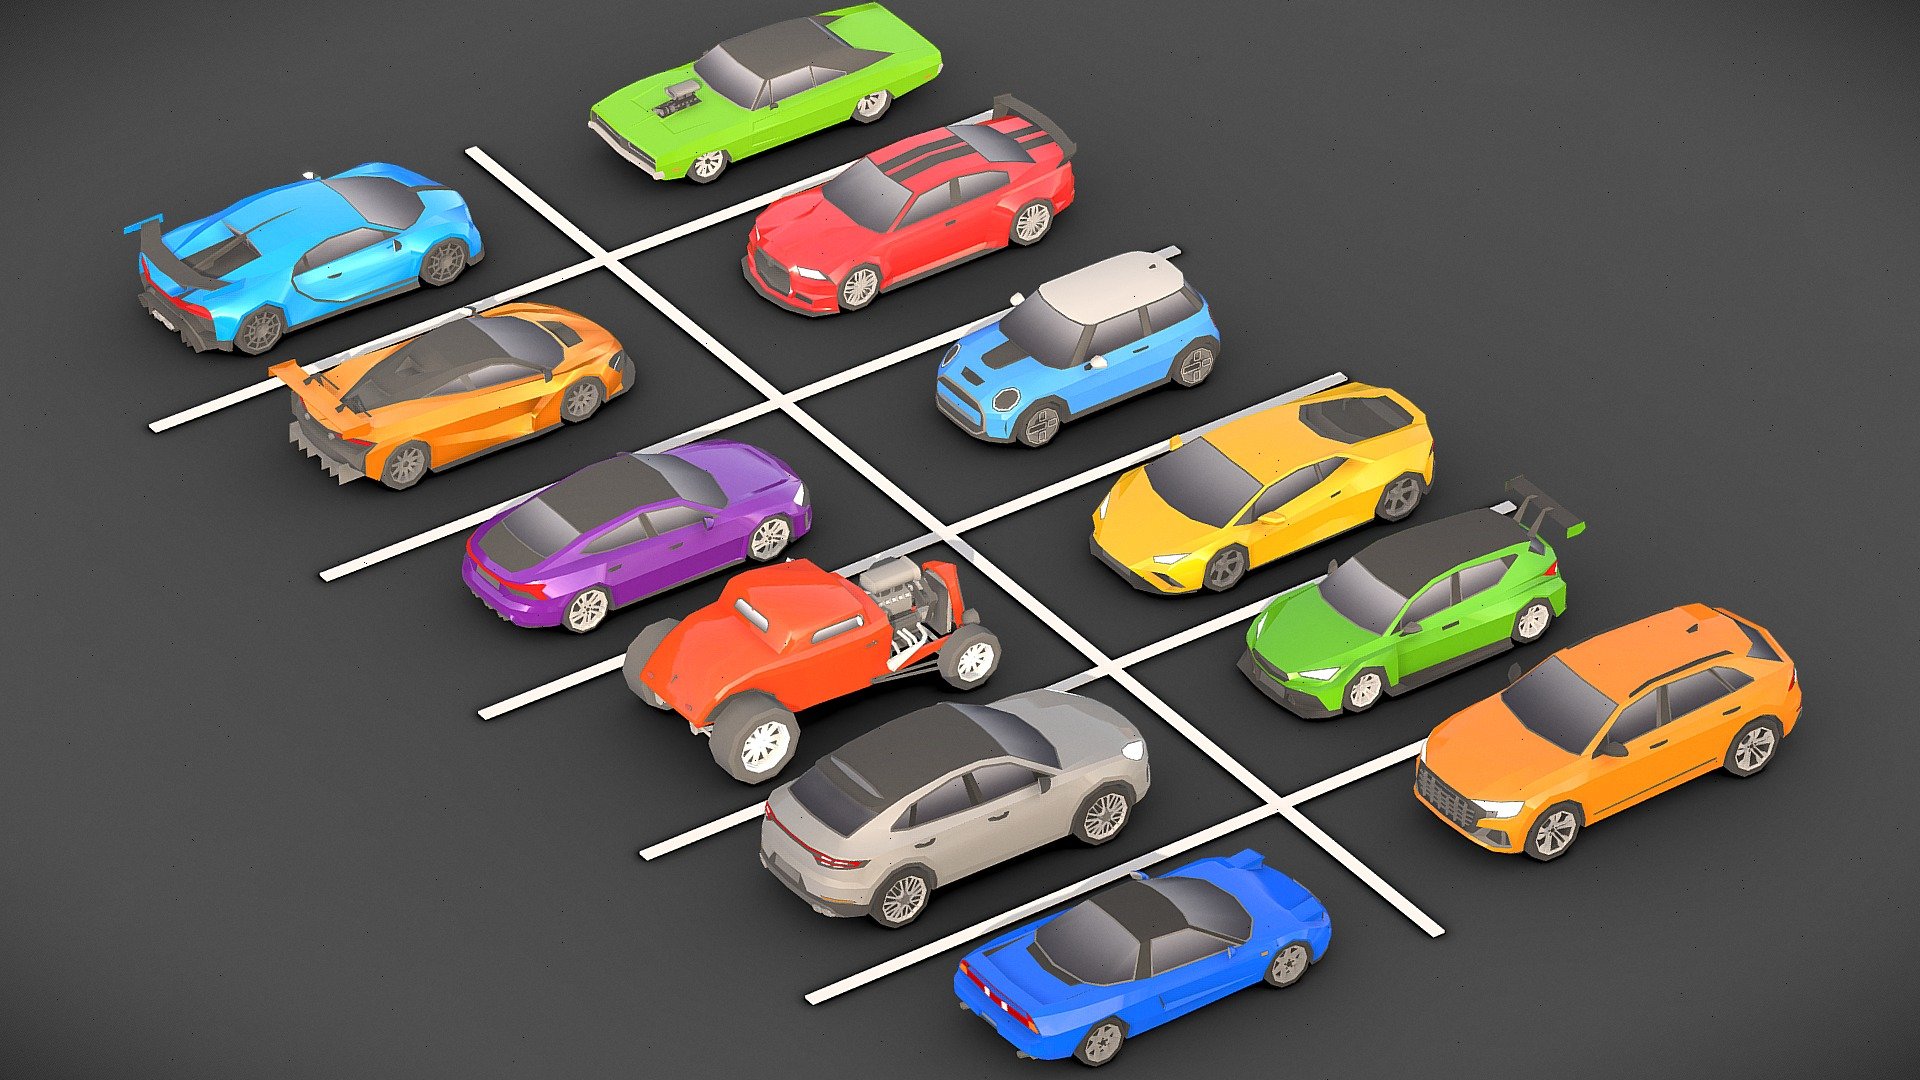 Low-poly Car Pack 3D.

You can use these models in any game and project.

This package includes 12 car .

This model is made with order and precision.

The color of the body and wheels can be changed.

Separated parts (body. wheel.Trailers ).

Very low poly.

1000  - 4000 triangles per car.

Texture size: 256 (PNG).

Number of textures: 1.

Number of materials: 1.

format: fbx, obj, 3d max - Low-poly Car Pack - Buy Royalty Free 3D model by Sidra (@Sidramax) 3d model